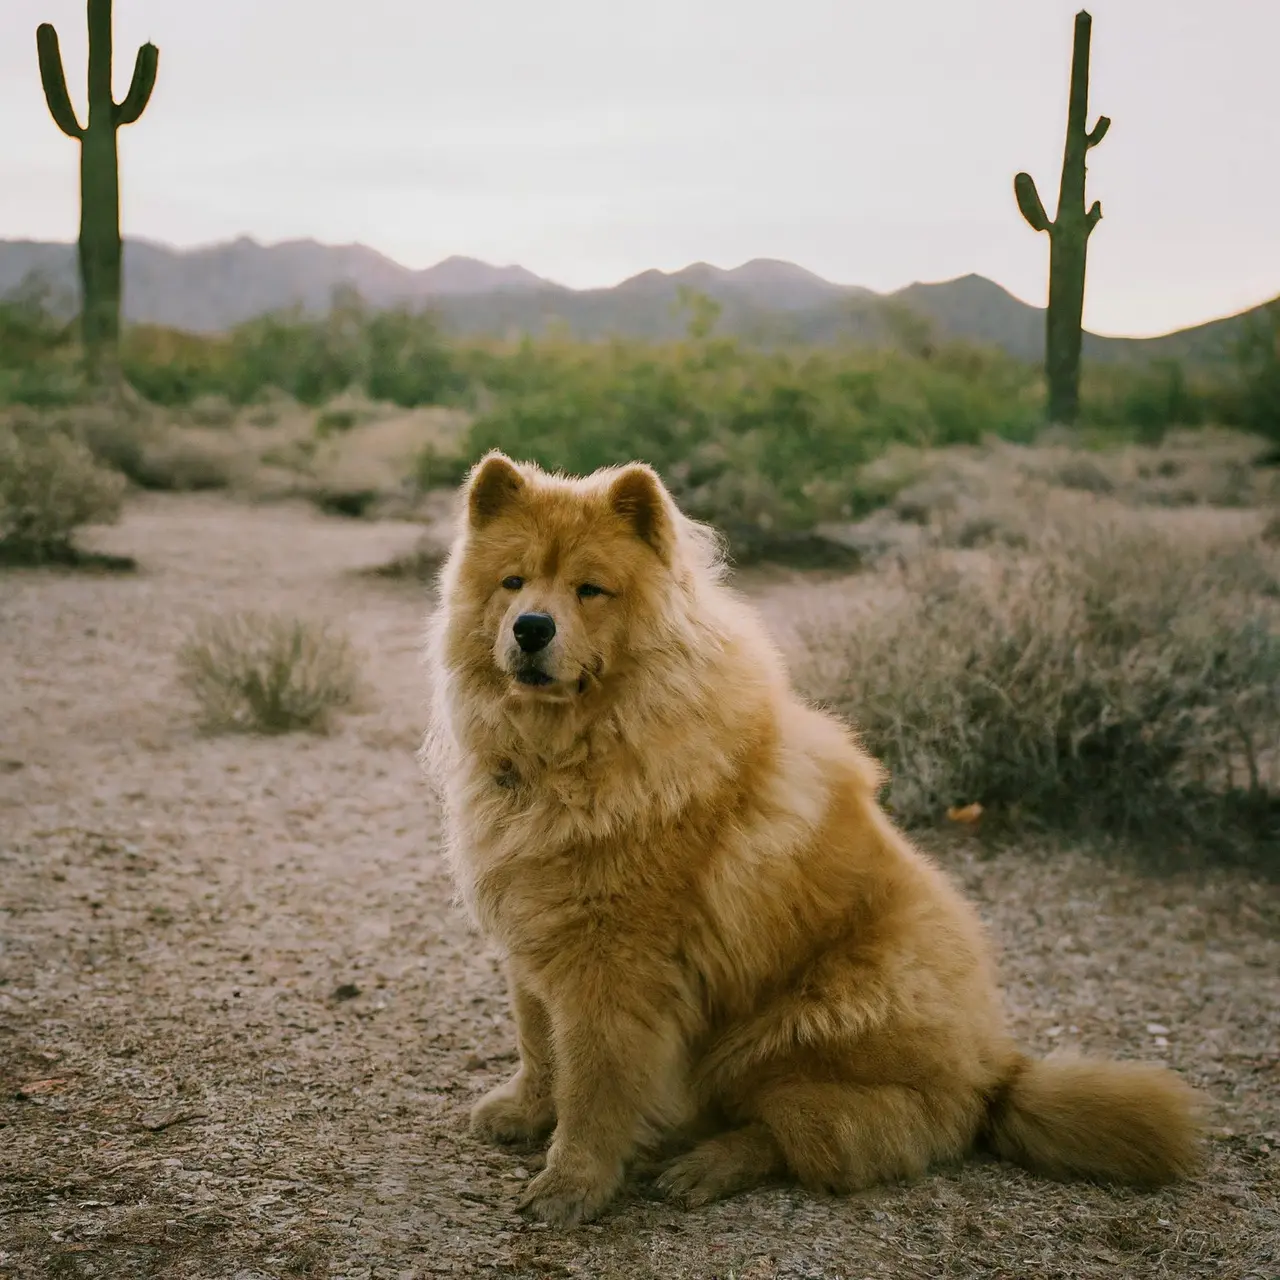 A fluffy dog in a desert landscape with cacti. 35mm stock photo